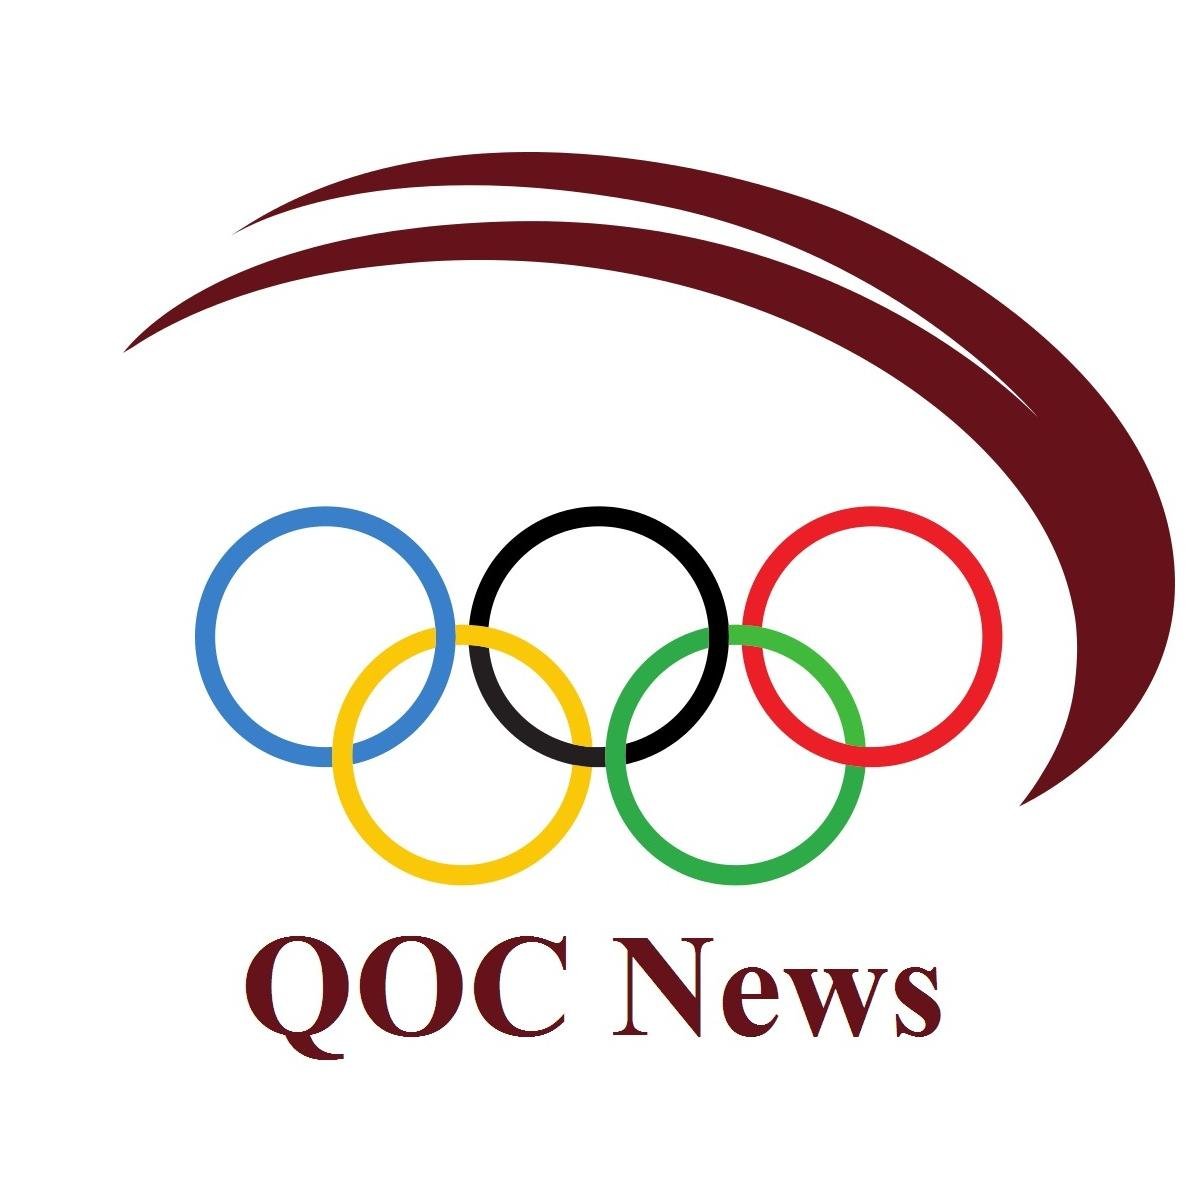 The official Twitter news account of the Qatar Olympic Committee.
Website: http://t.co/xy32u1lkiN